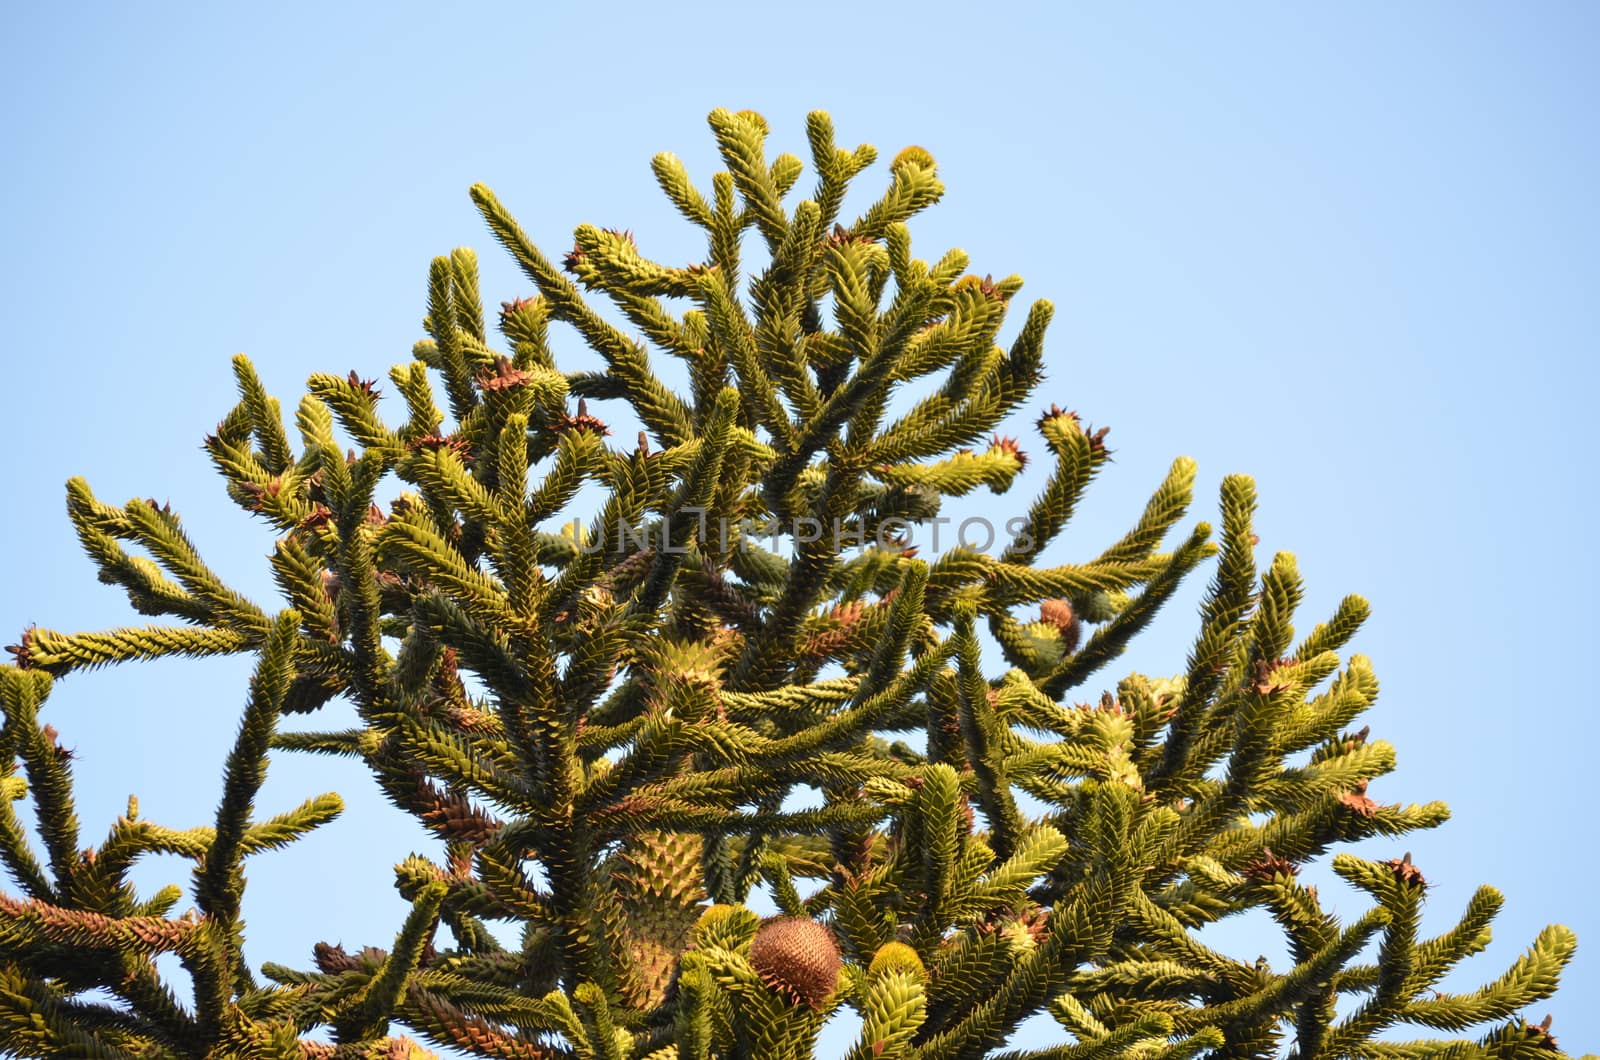 Araucaria has different names: "tree snake, shed fir monkey tail tree called etc, is a plant which belongs to the family of (Araucariaceae).
